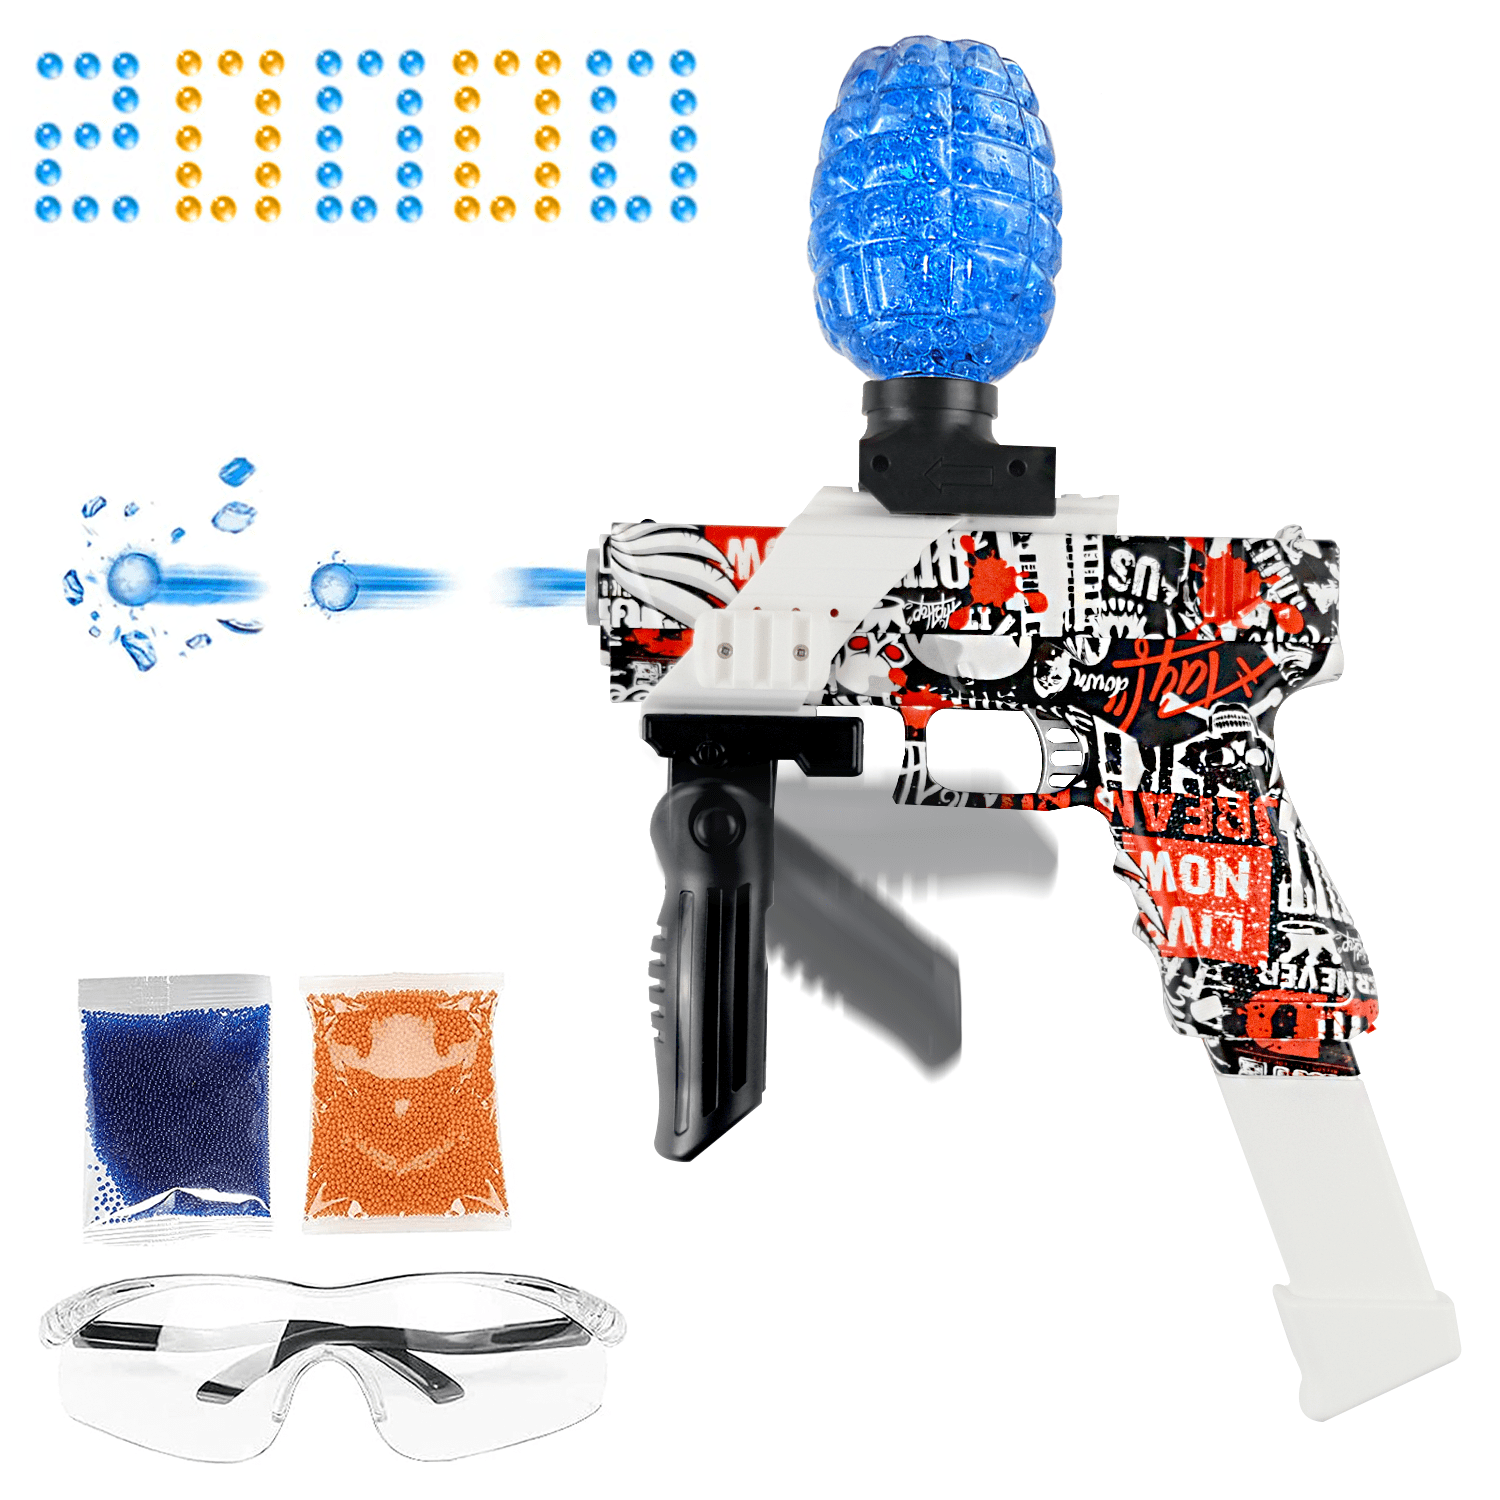 2 Target USA Stars Splatter Ball Blaster Automatic Gel Ball Toy for Summer Outdoor Game Gift for Boy and Girl 12+ Electric Gel Blaster Uzi Gel Ball Blaster Pistol with 20000 Water Bead 